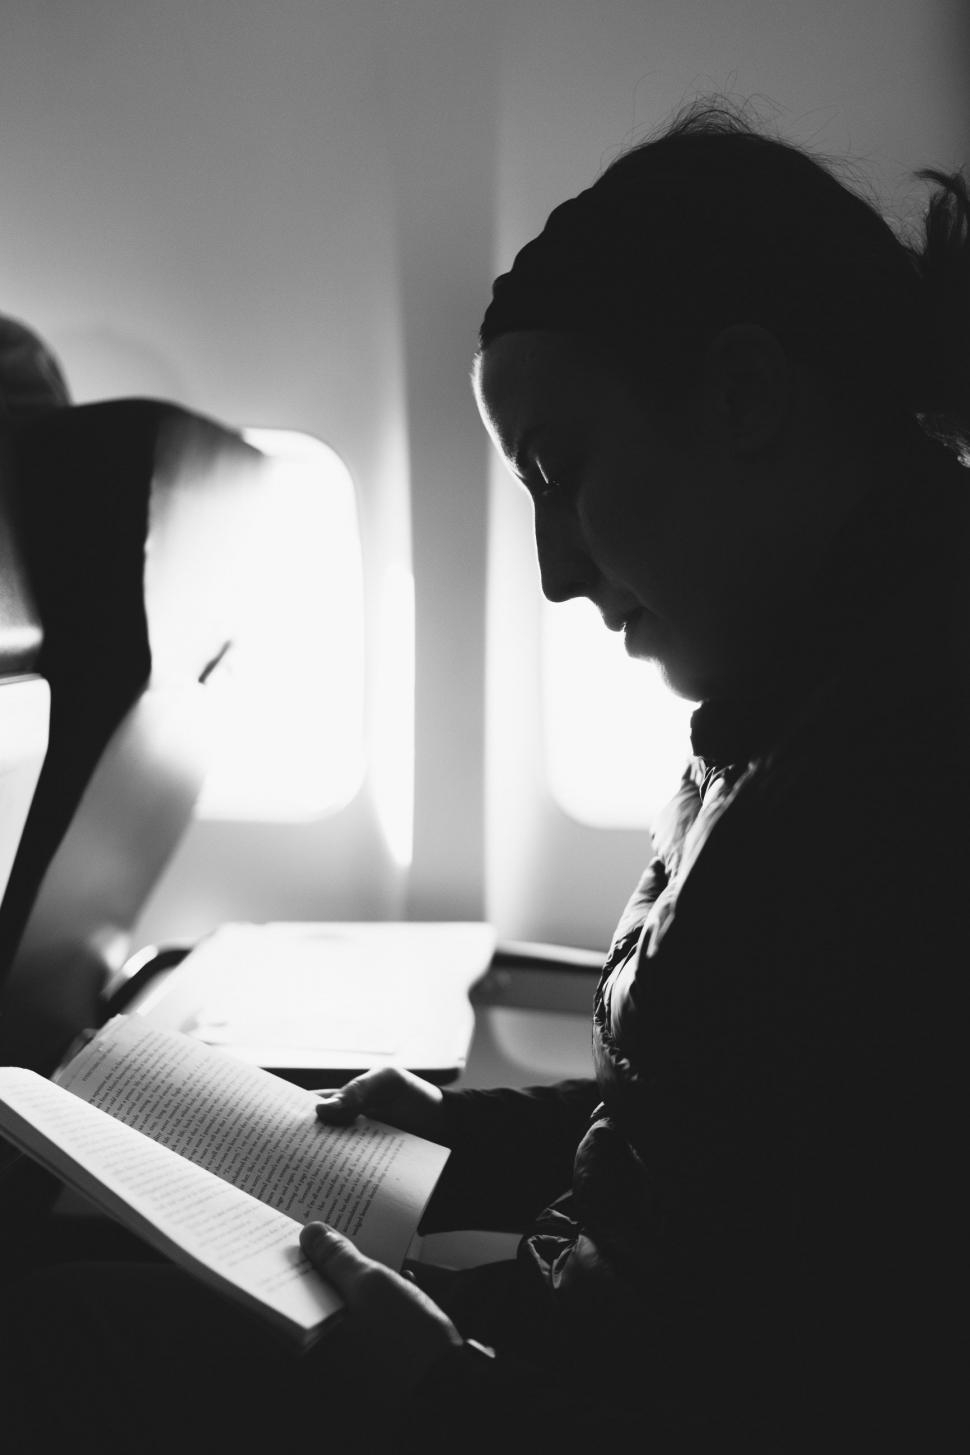 Free Image of Woman Sitting on Airplane Reading Book 